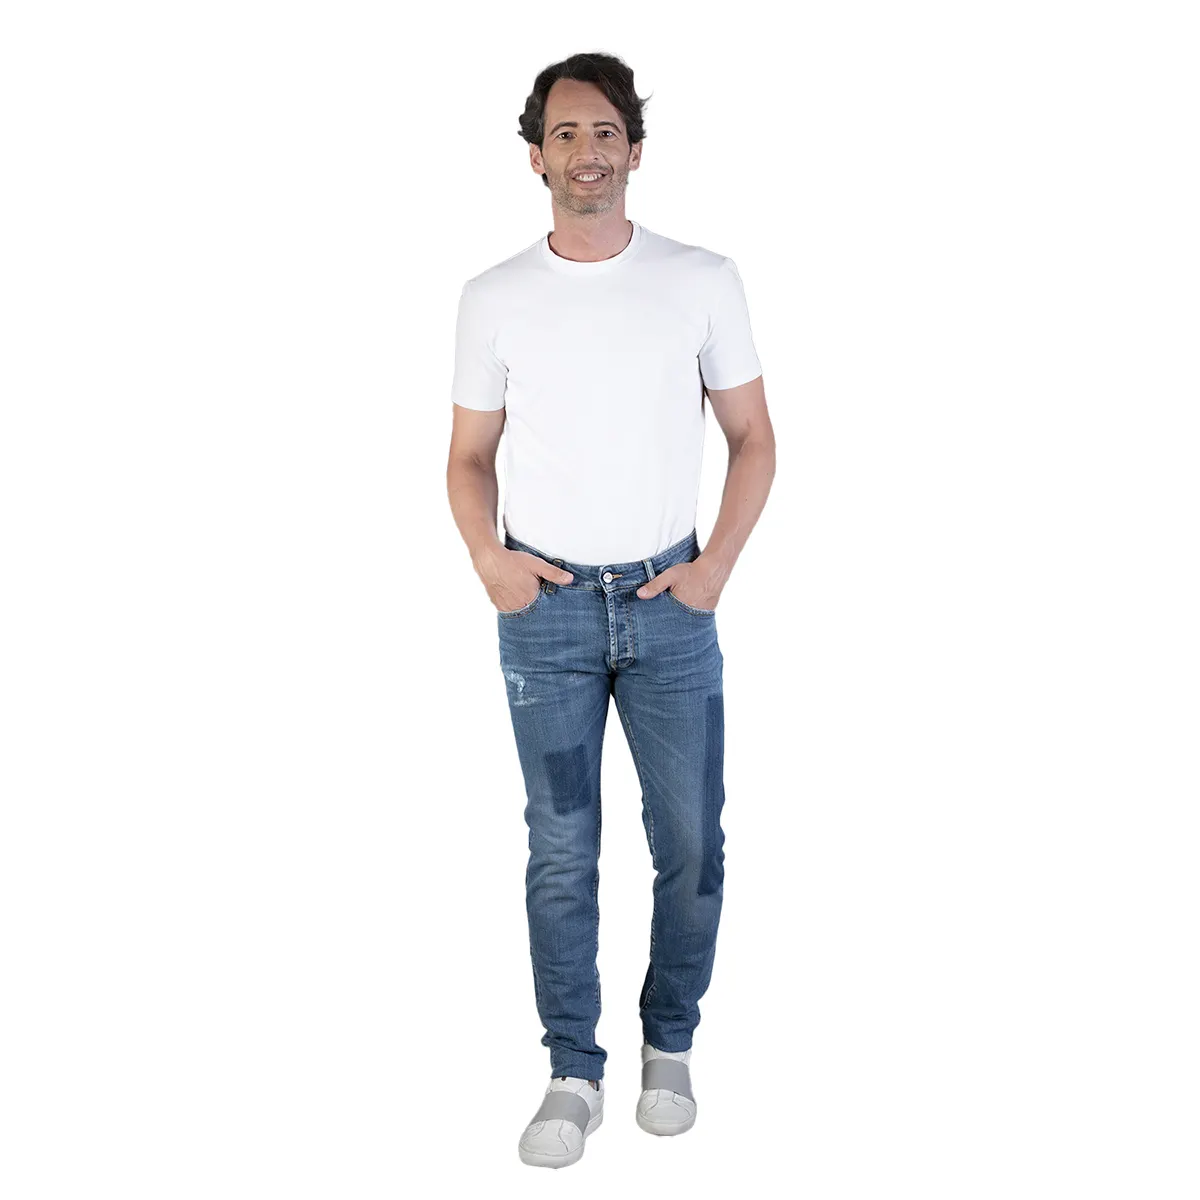 DENIM V10 FUORICLASSE High Quality Jeans Made in Italy by Skilled Italian Craftsmen Luxury Men's Jeans 5-pocket model stonewash